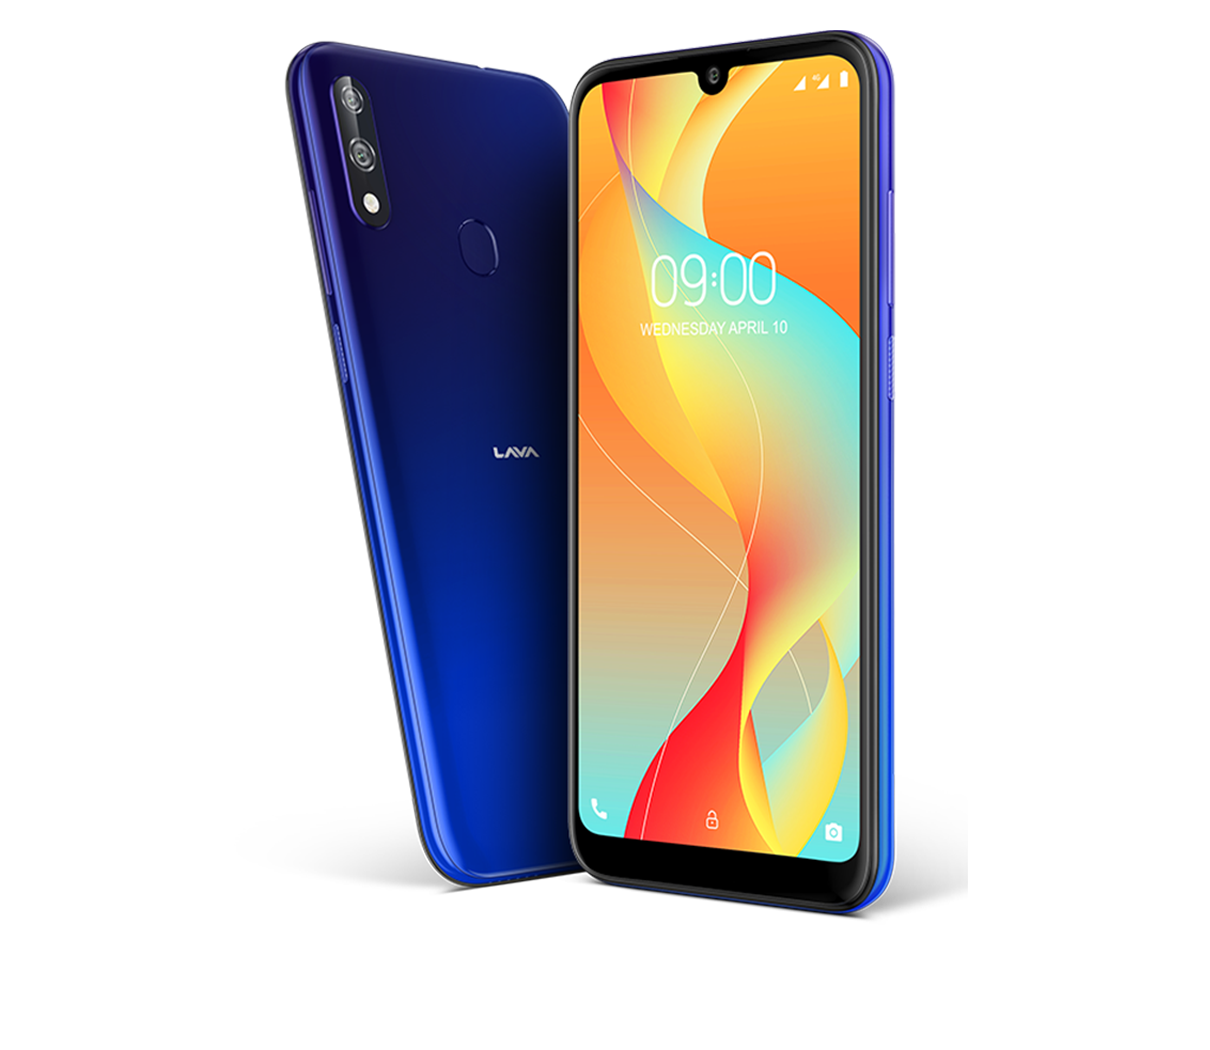 Lava Z66 with 6.08-inch HD+ display, 3GB of RAM and 13MP+5 MP dual rear camera launched in India for ₹7777